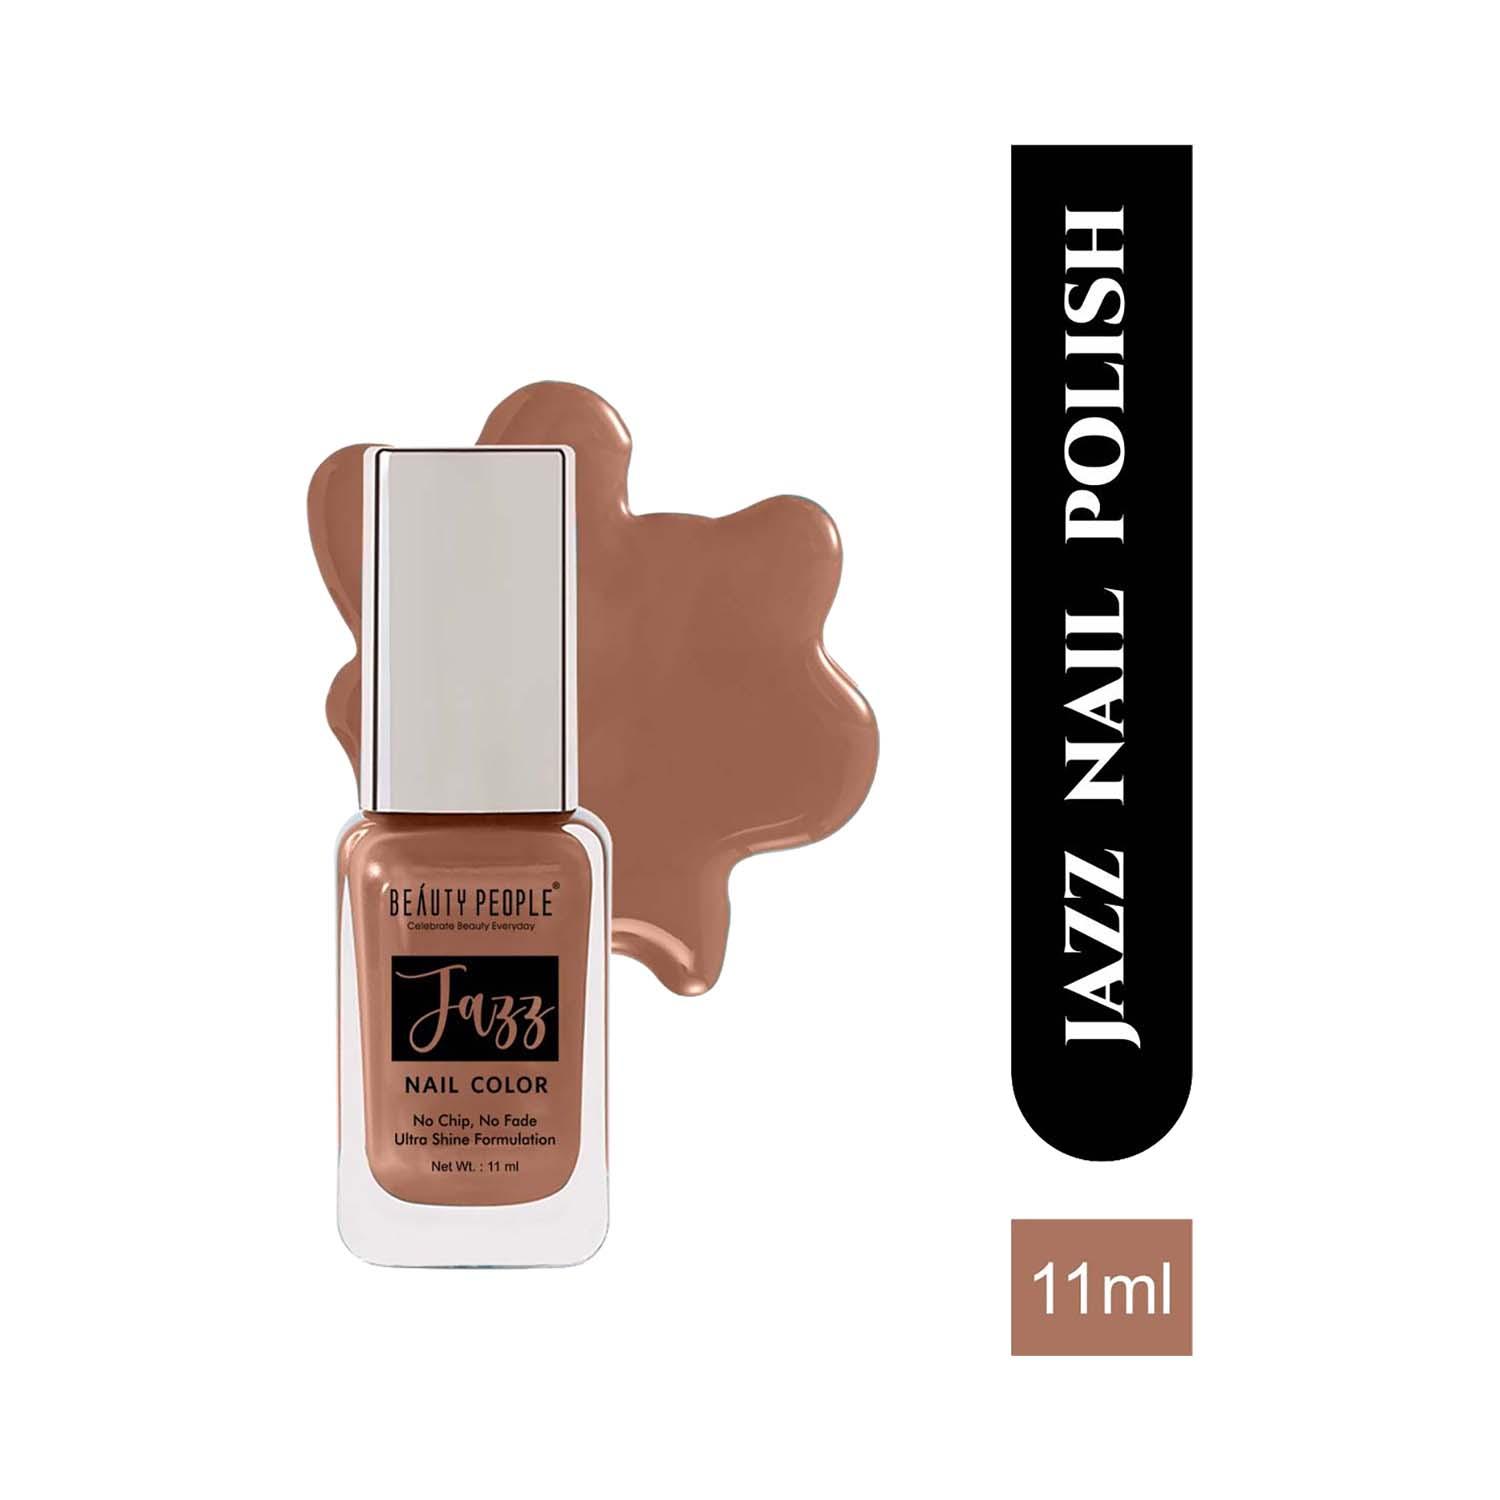 Beauty People | Beauty People Jazz Nail Color - 226 Nude At Best (11ml)